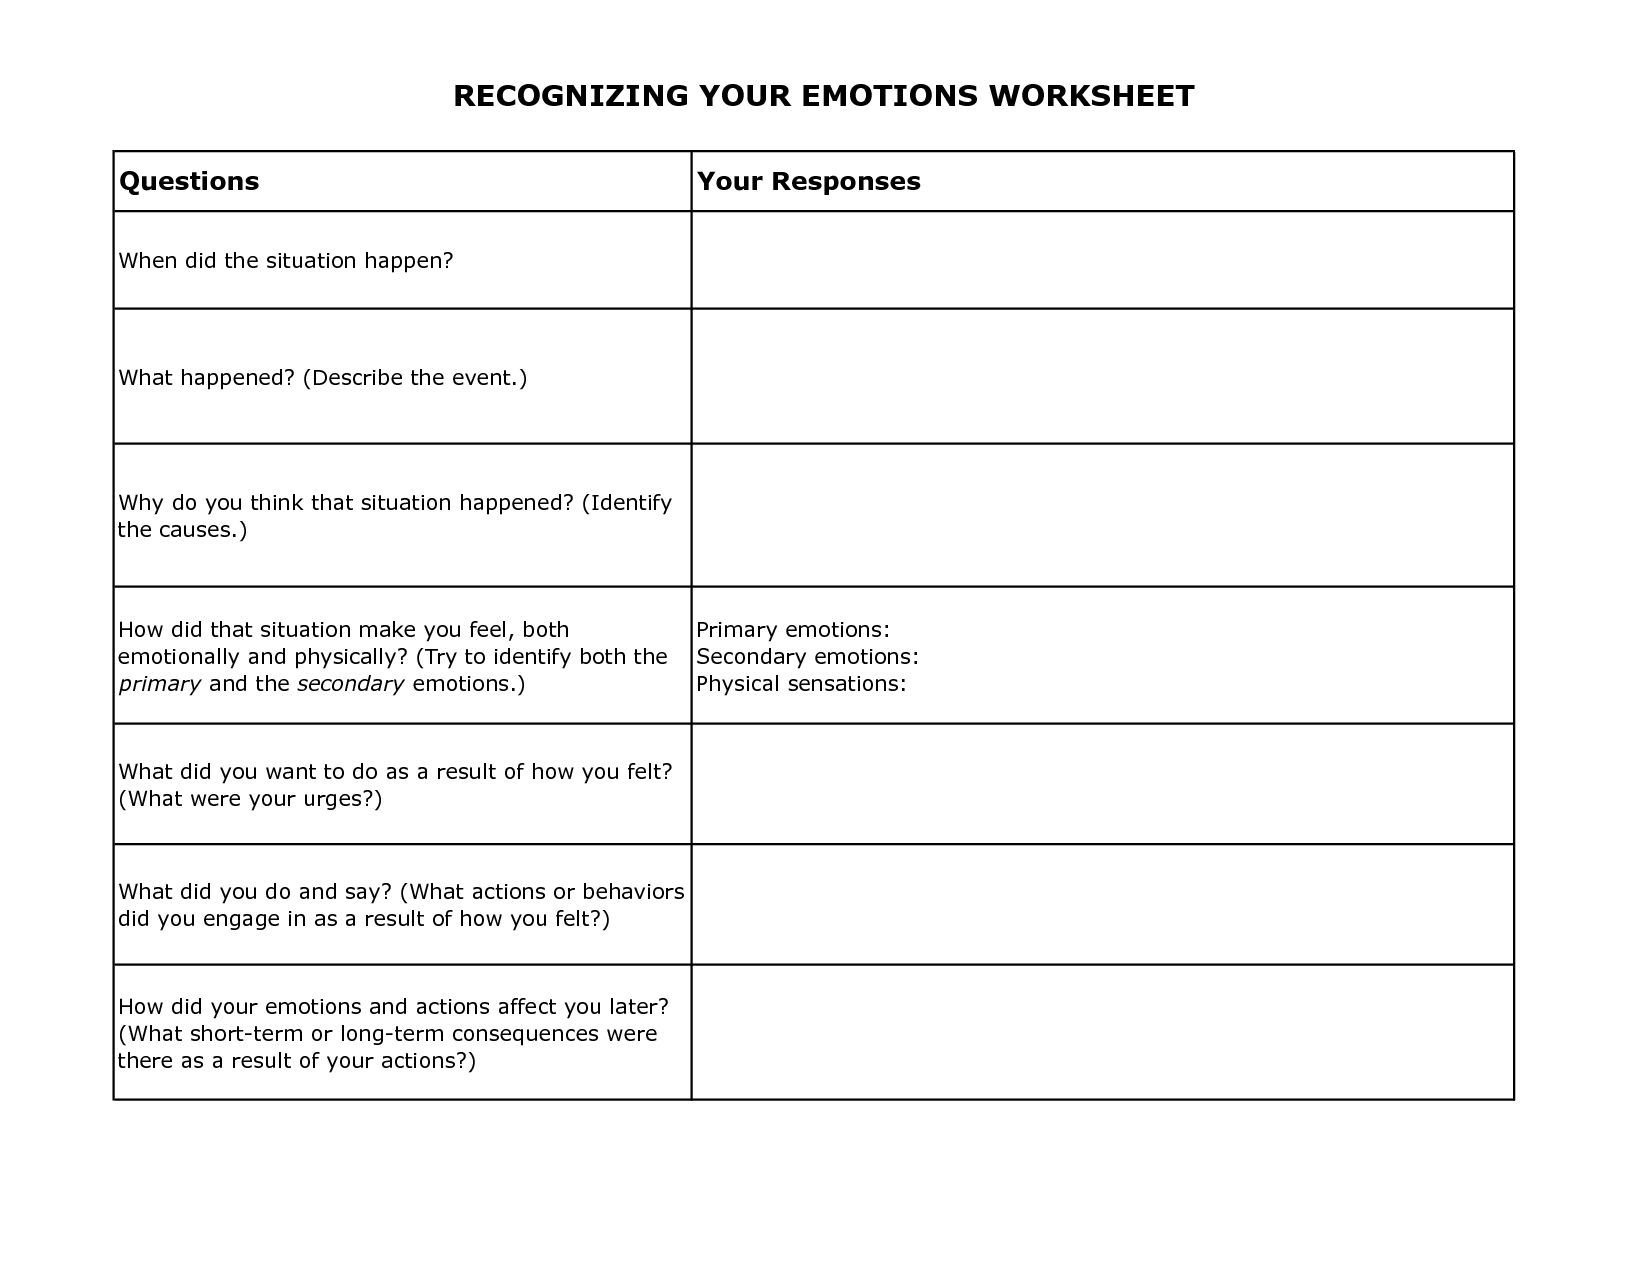 Free Printable Dbt Worksheets | Recognizing Your Emotions Worksheet - Free Printable Coping Skills Worksheets For Adults